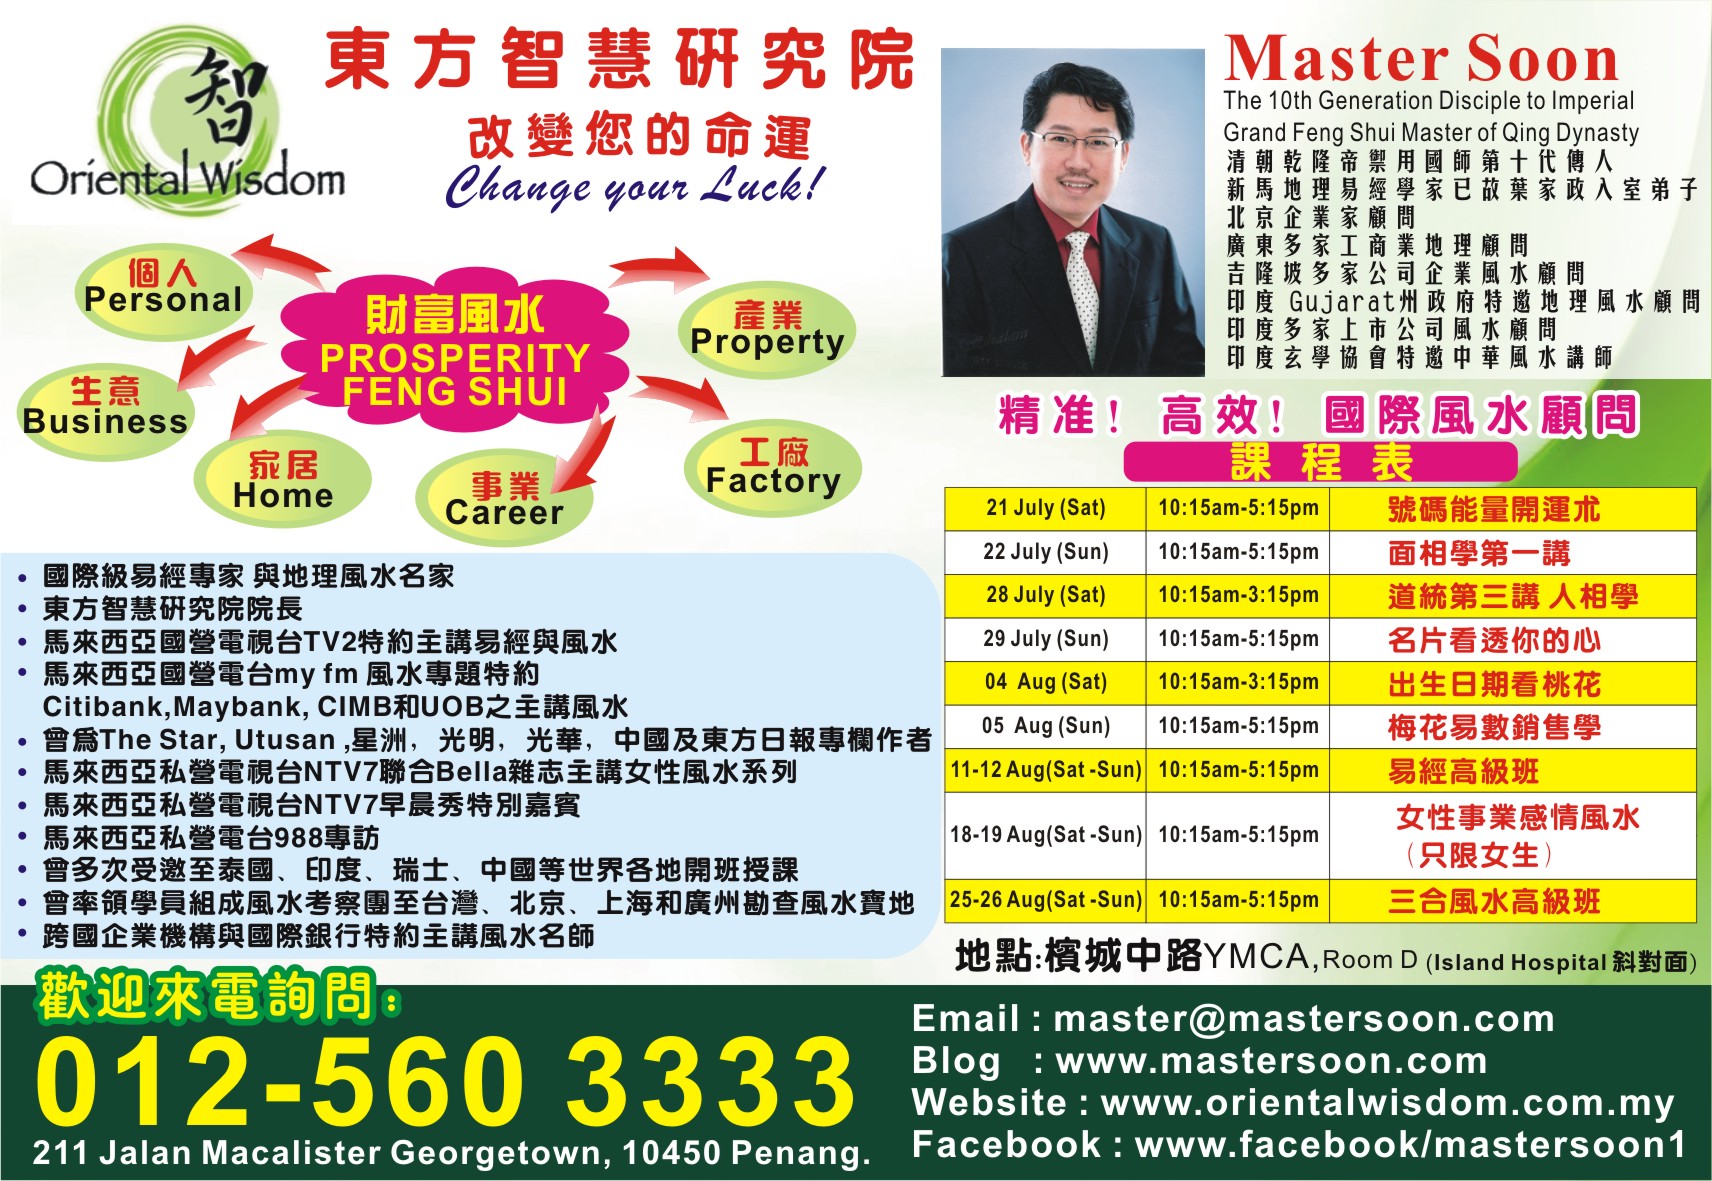 Up Coming Feng Shui Courses by Master Soon in July-Aug 2012